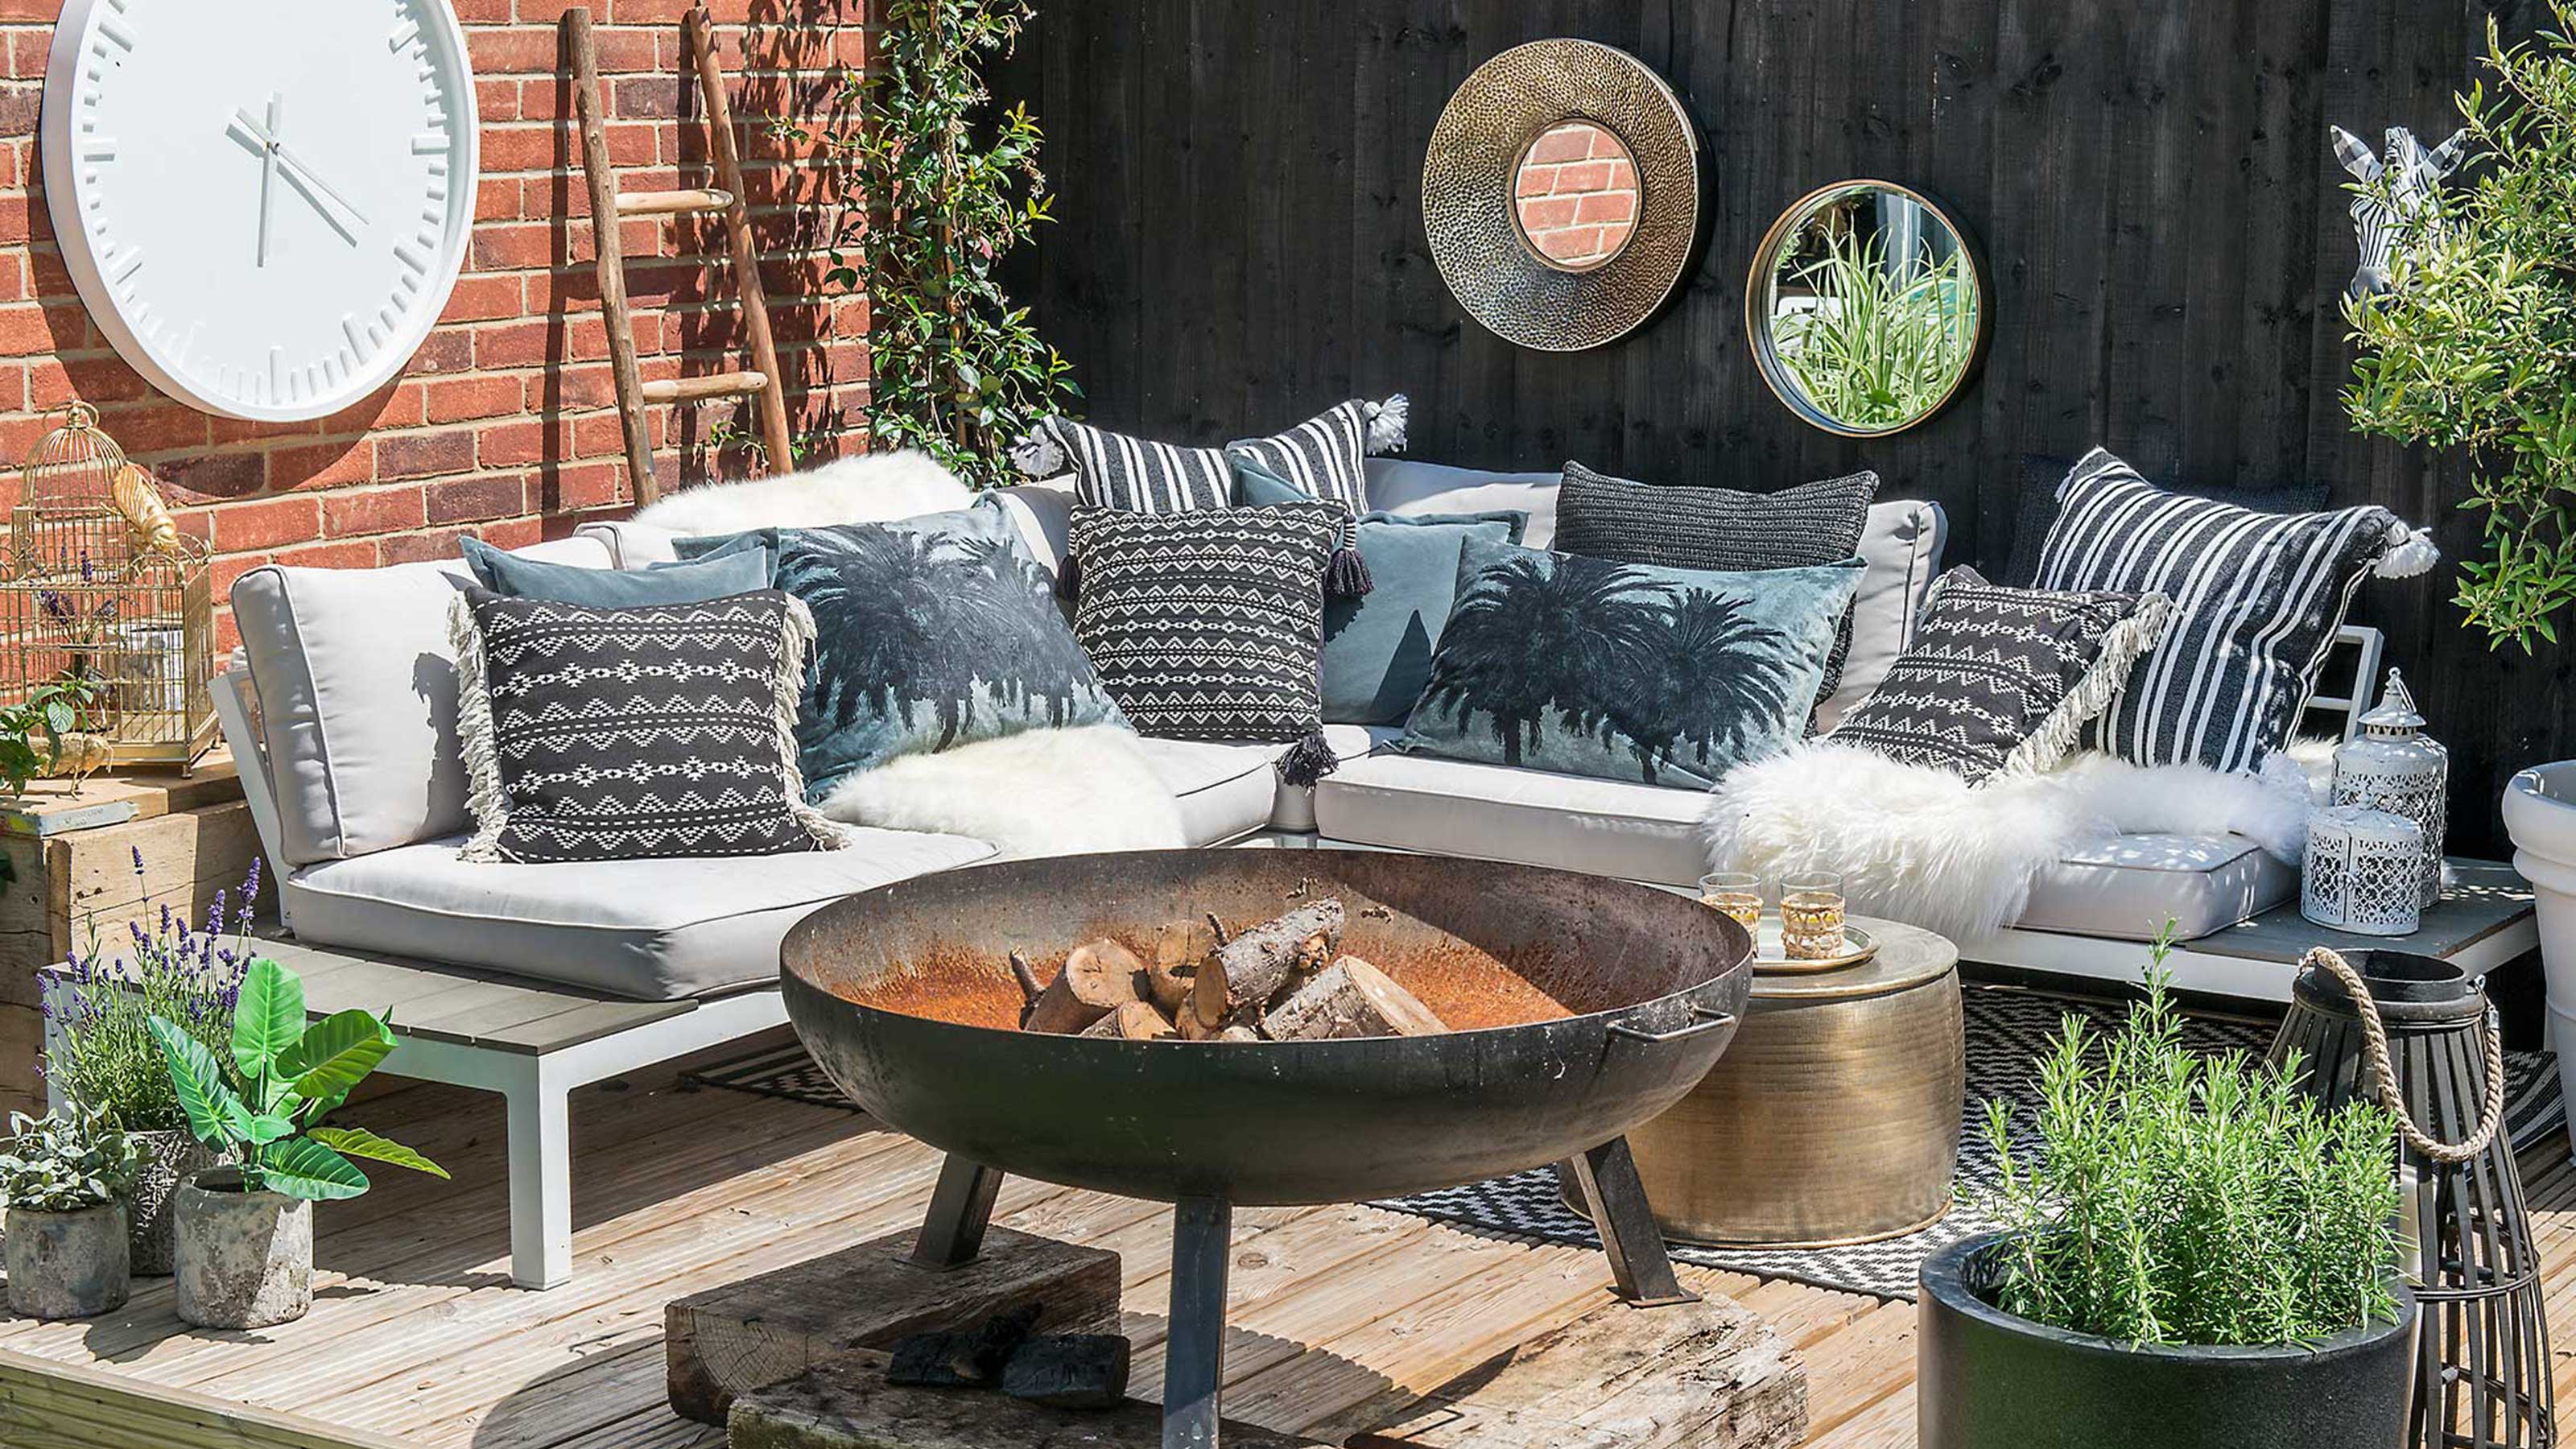 Outdoor living space ideas 20 looks that are perfect for relaxing ...